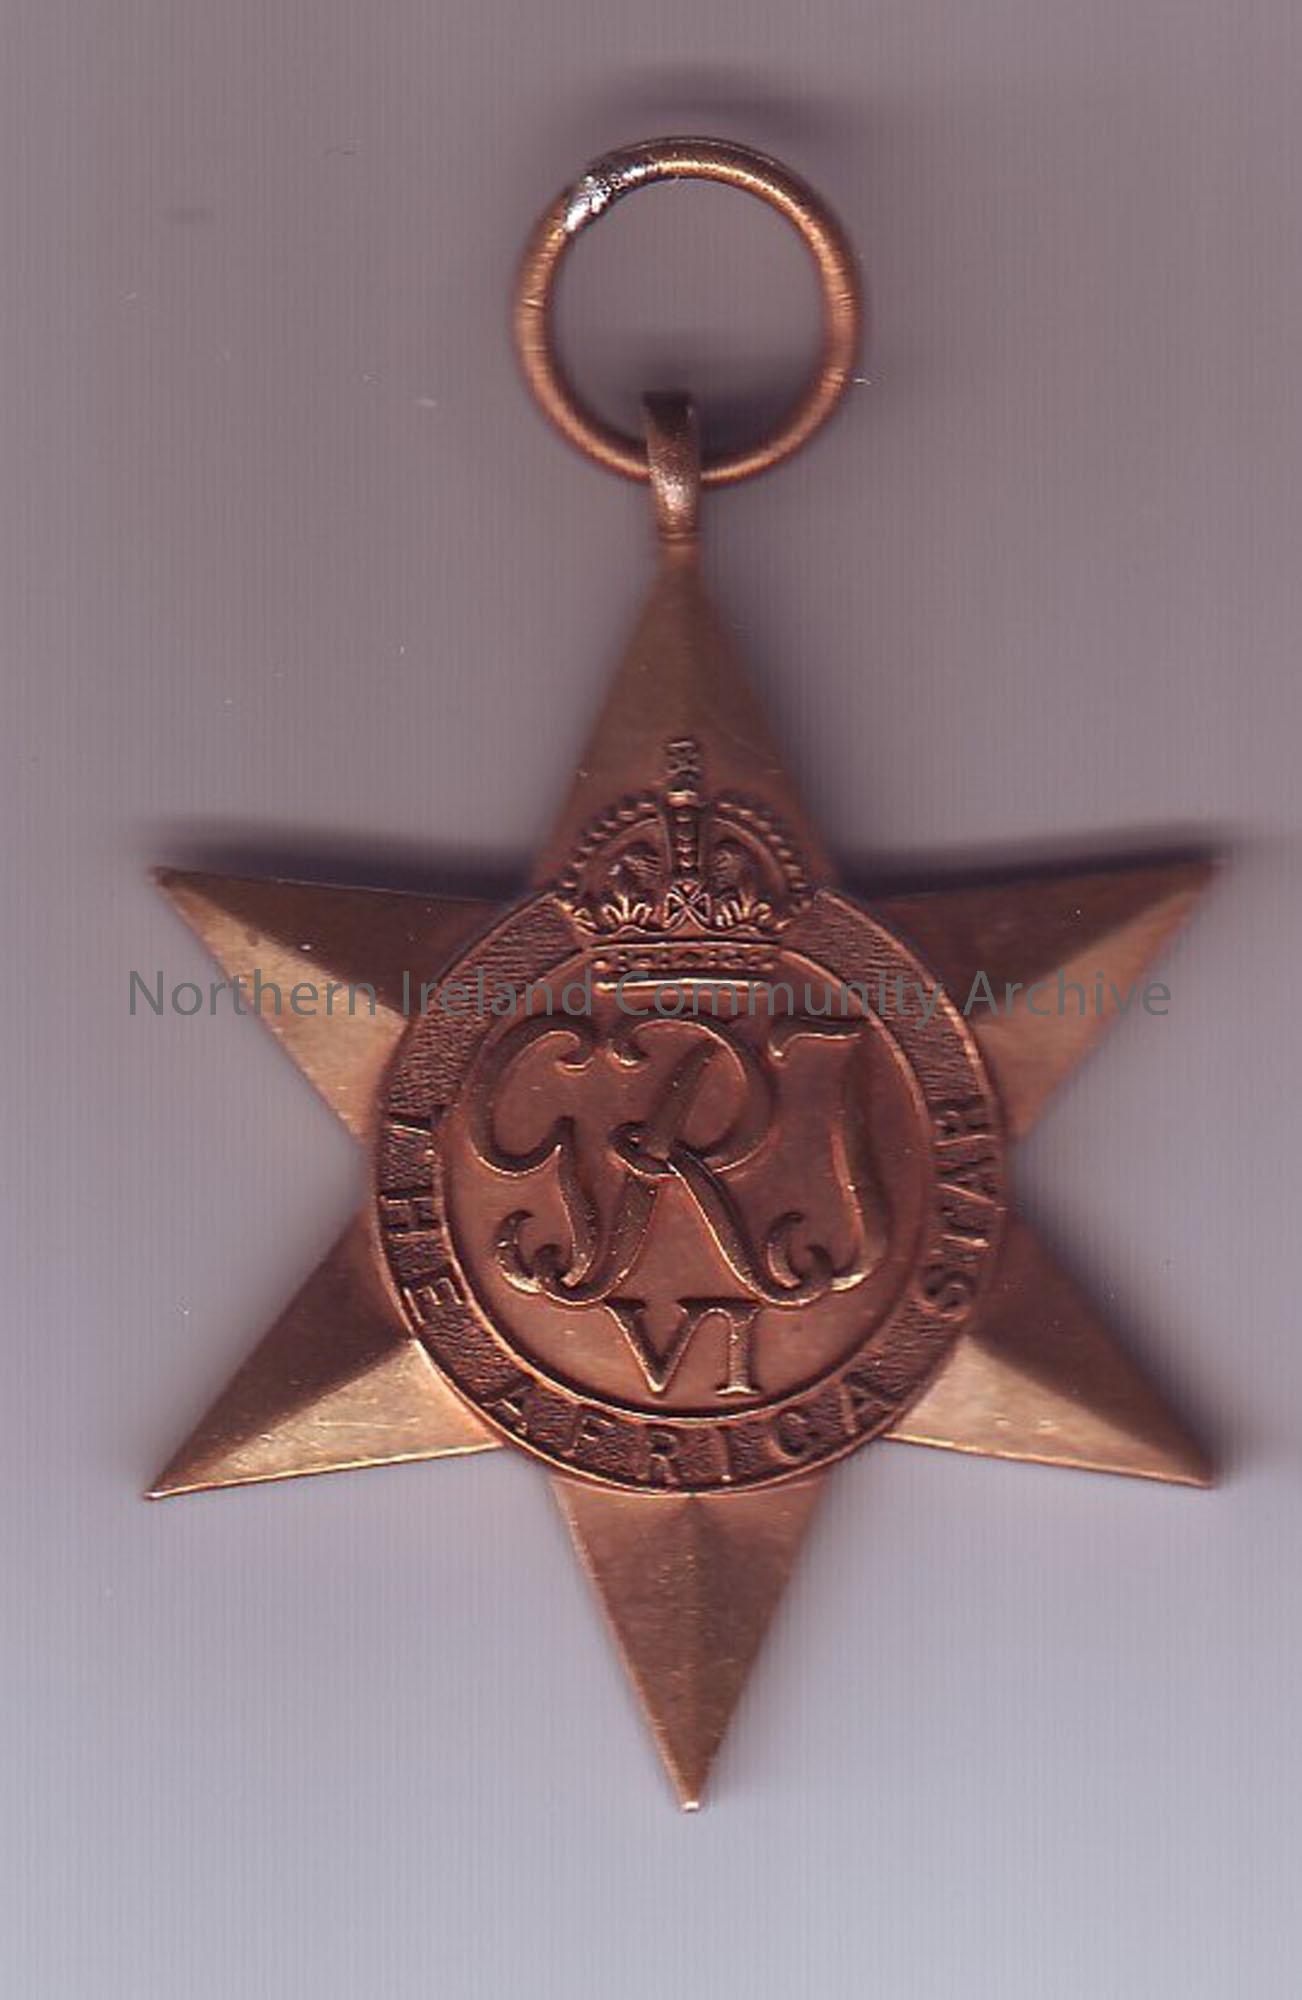 World War Two medal, the Africa Star, awarded to Sgt James Tweed